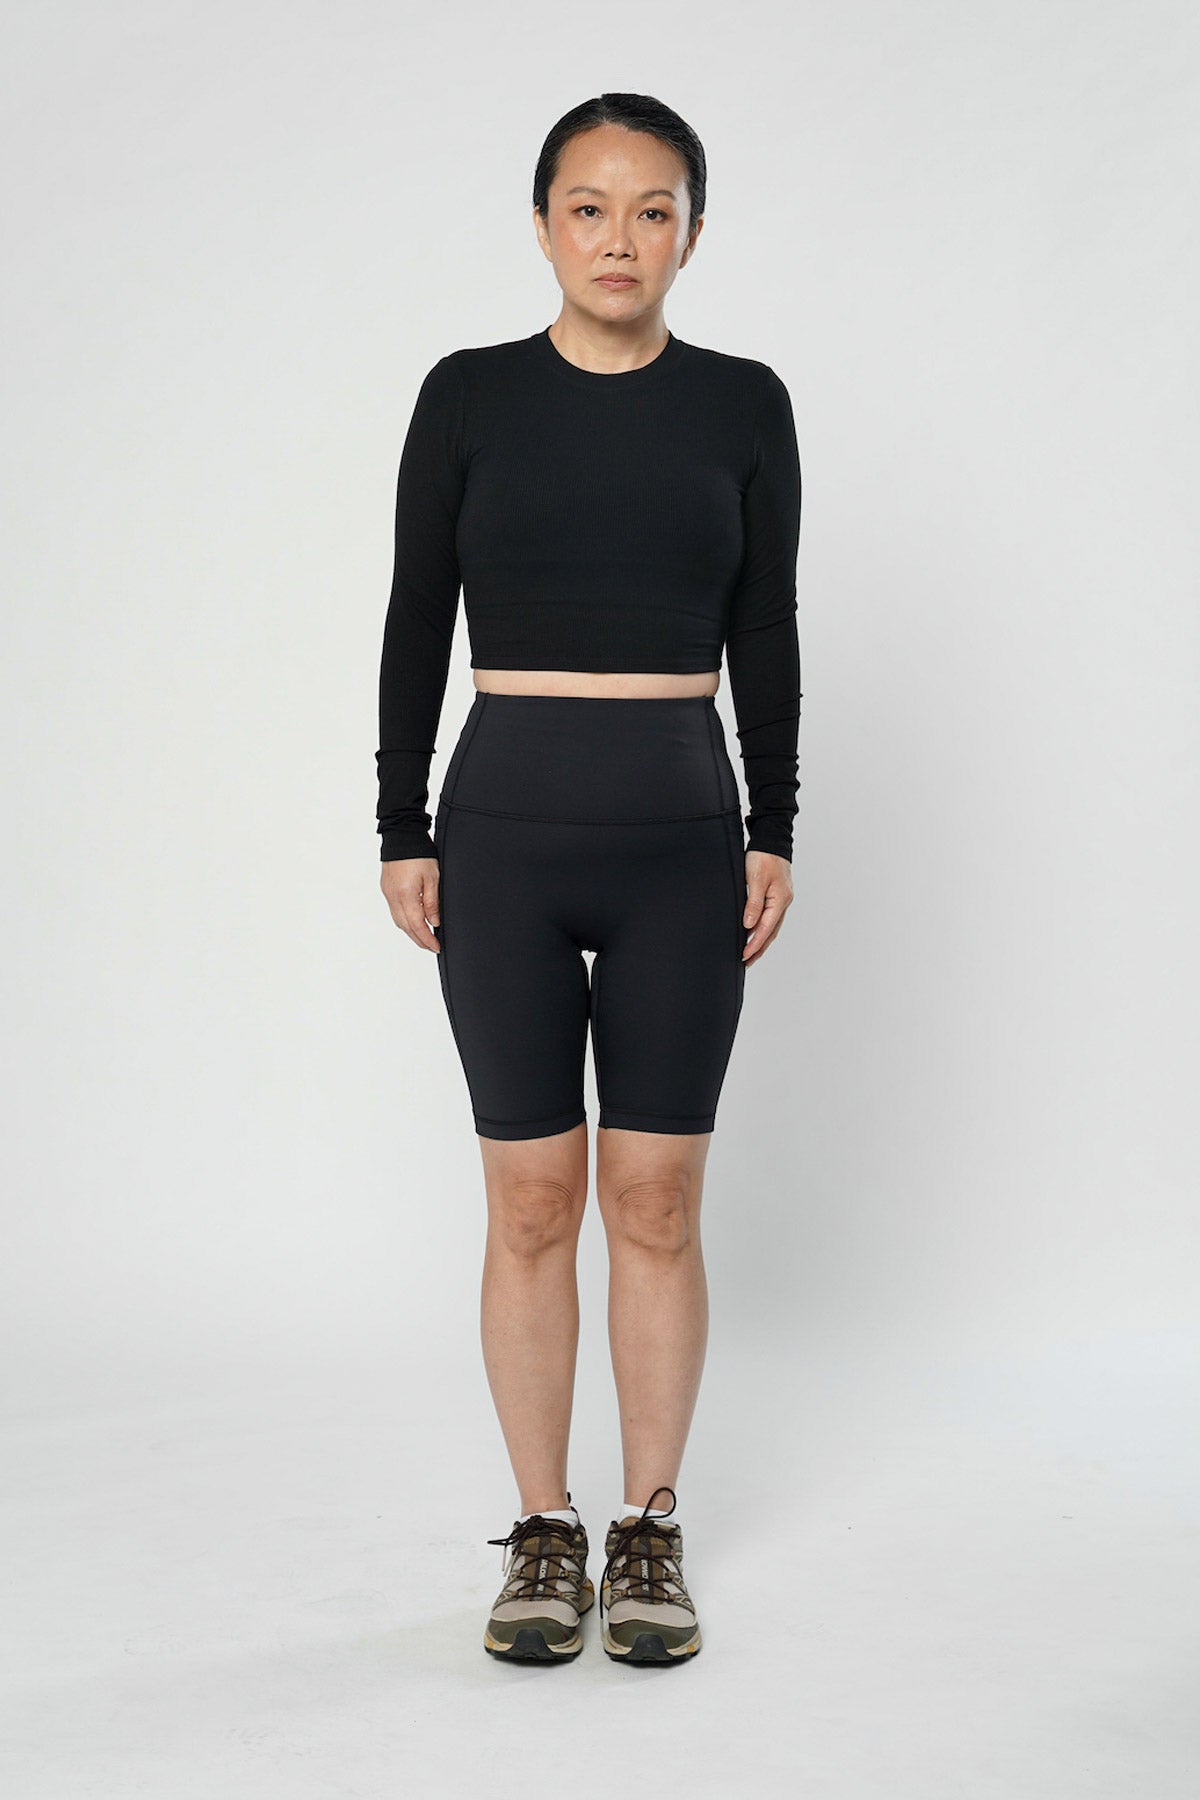 Warmth Long Sleeve Top In Black (3 XS LEFT)